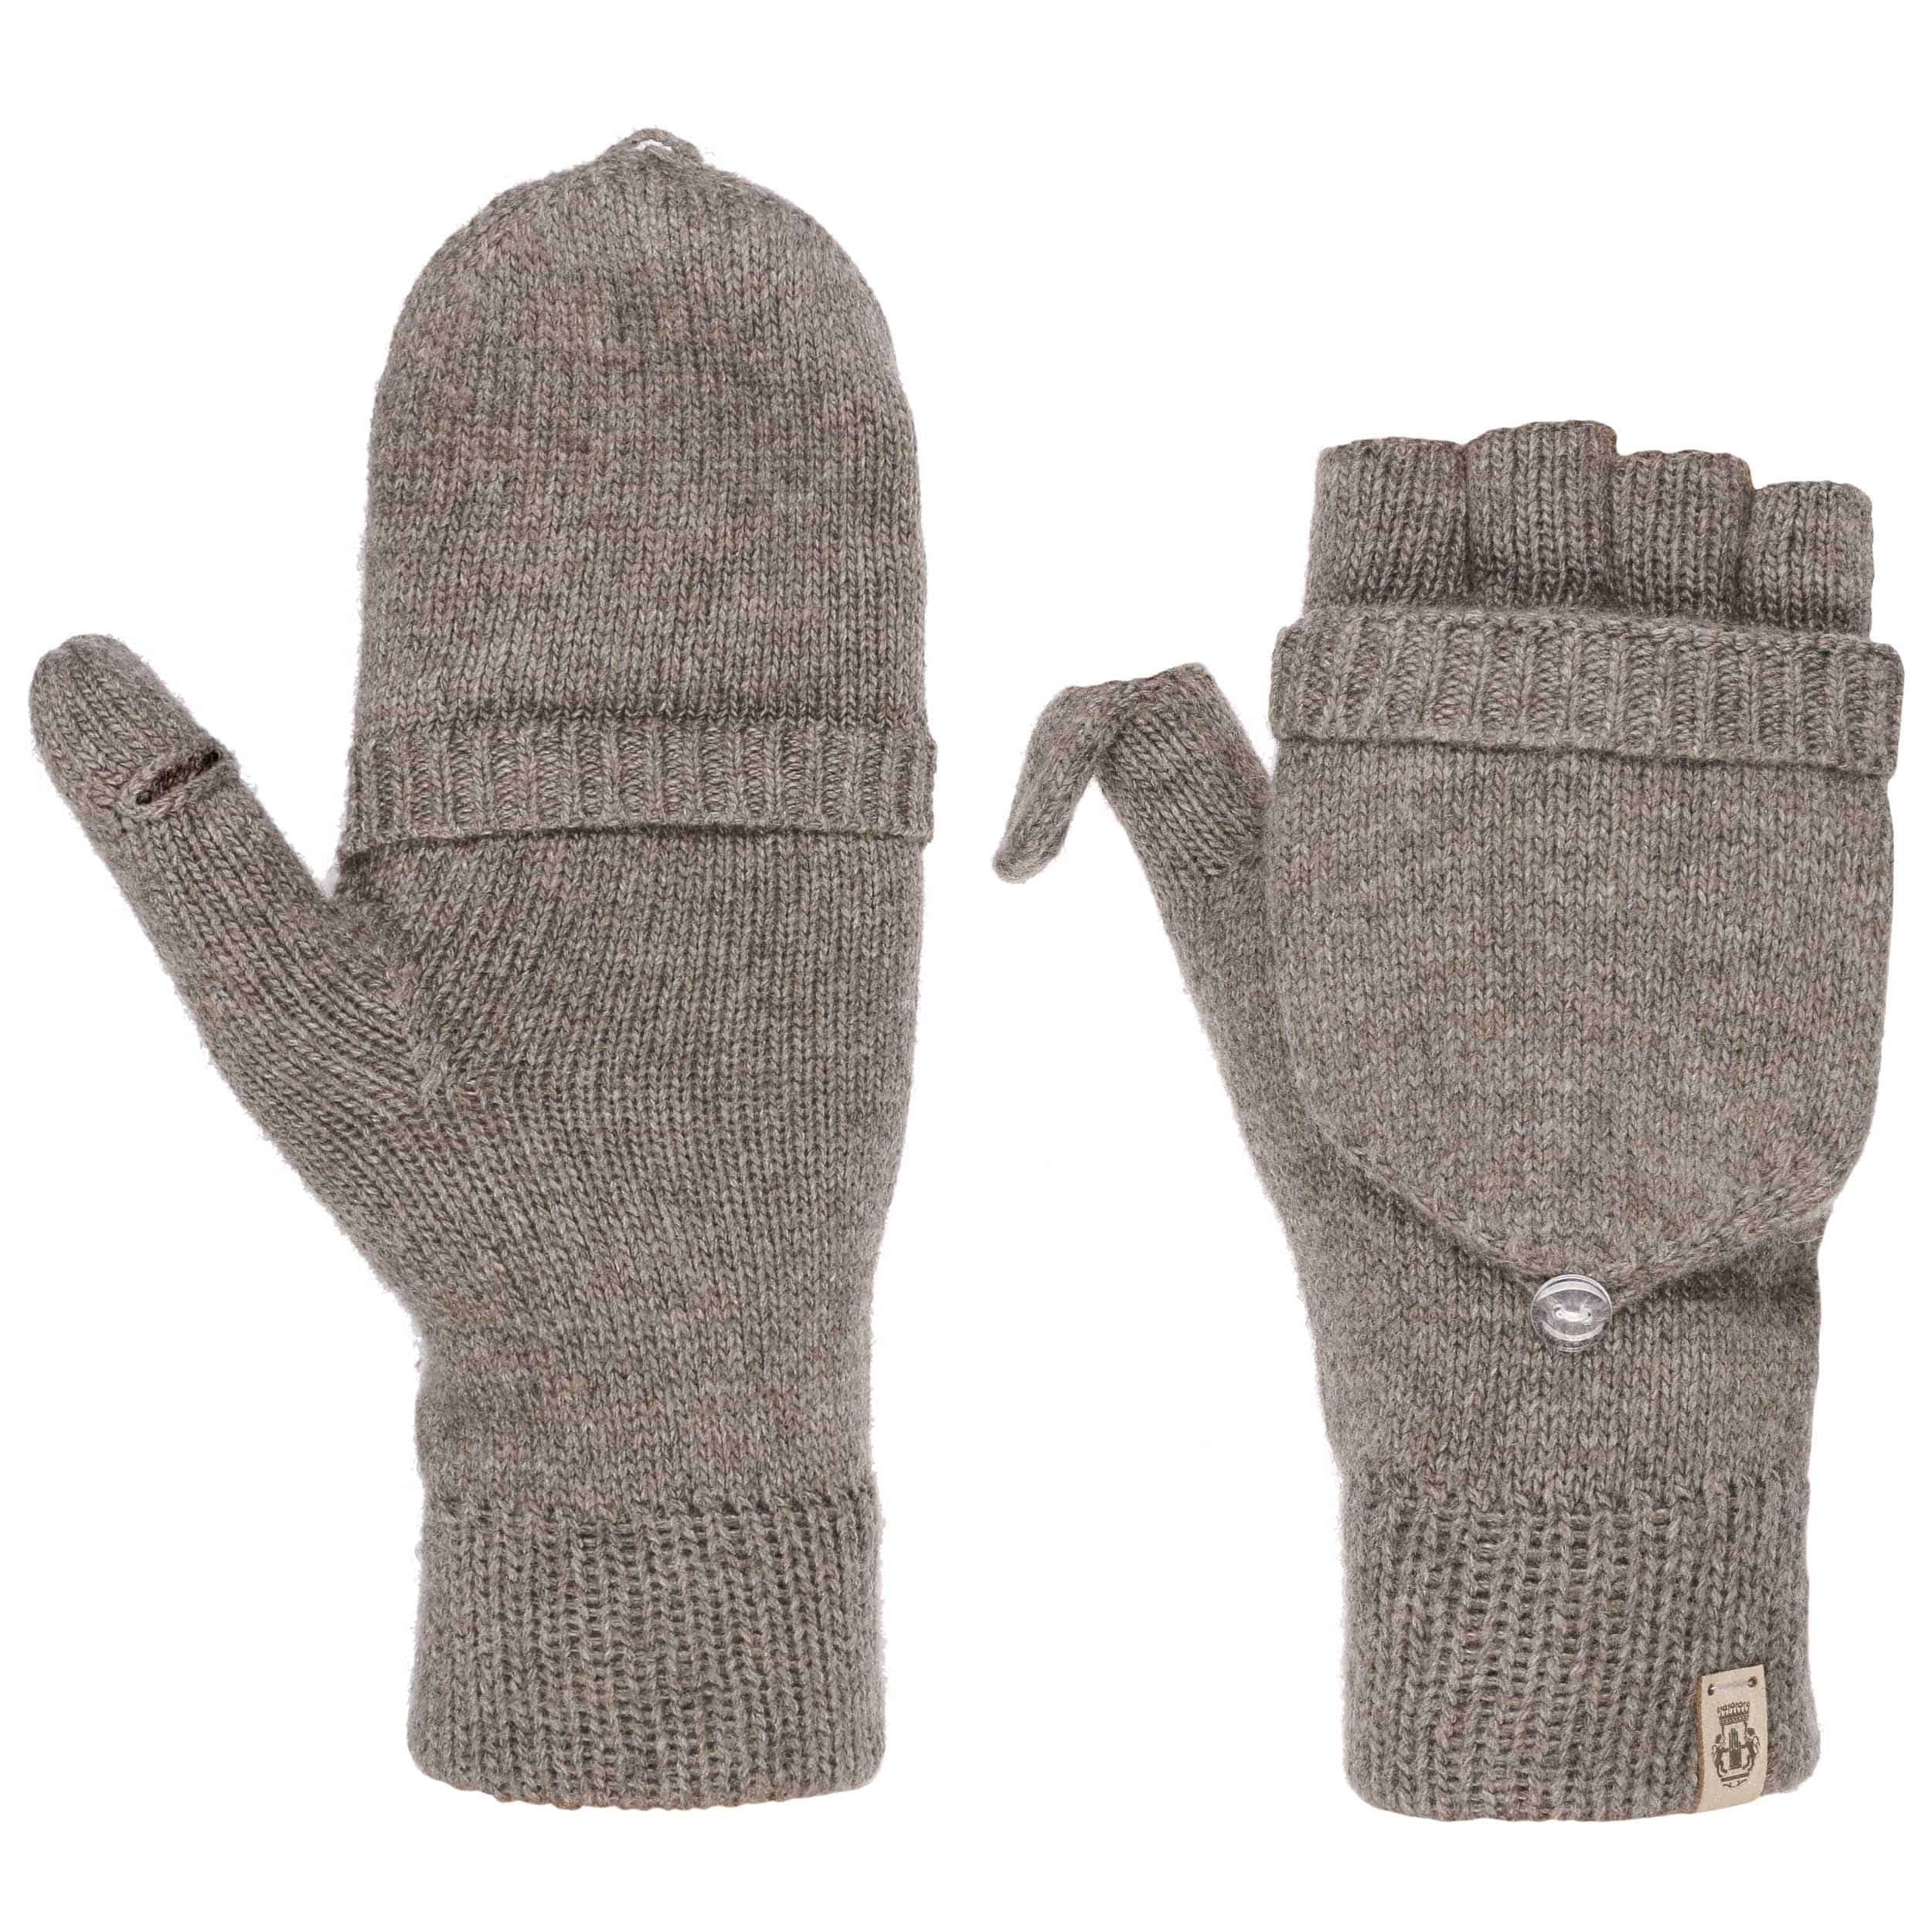 leather and wool fingerless gloves